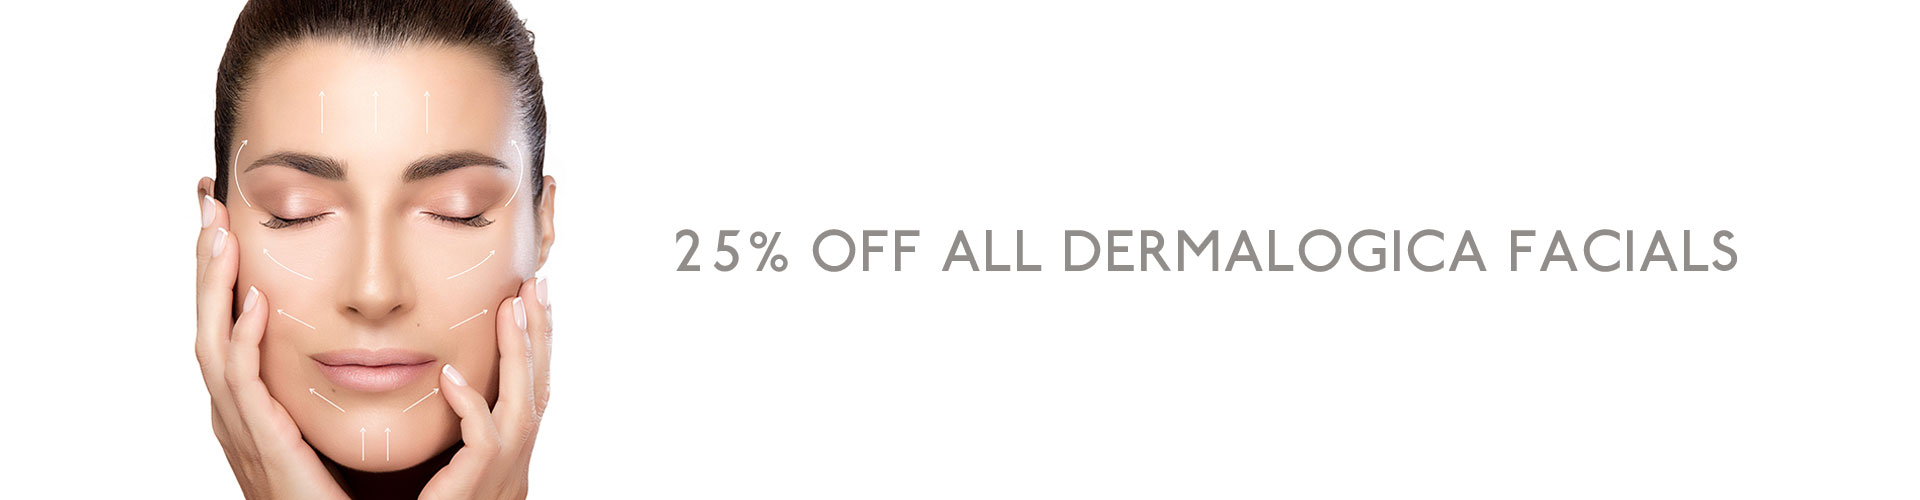 Get 25 % OFF Dermalogica Facials Including Pro Power Peels At  Mojo's Beauty Salon in Chorley